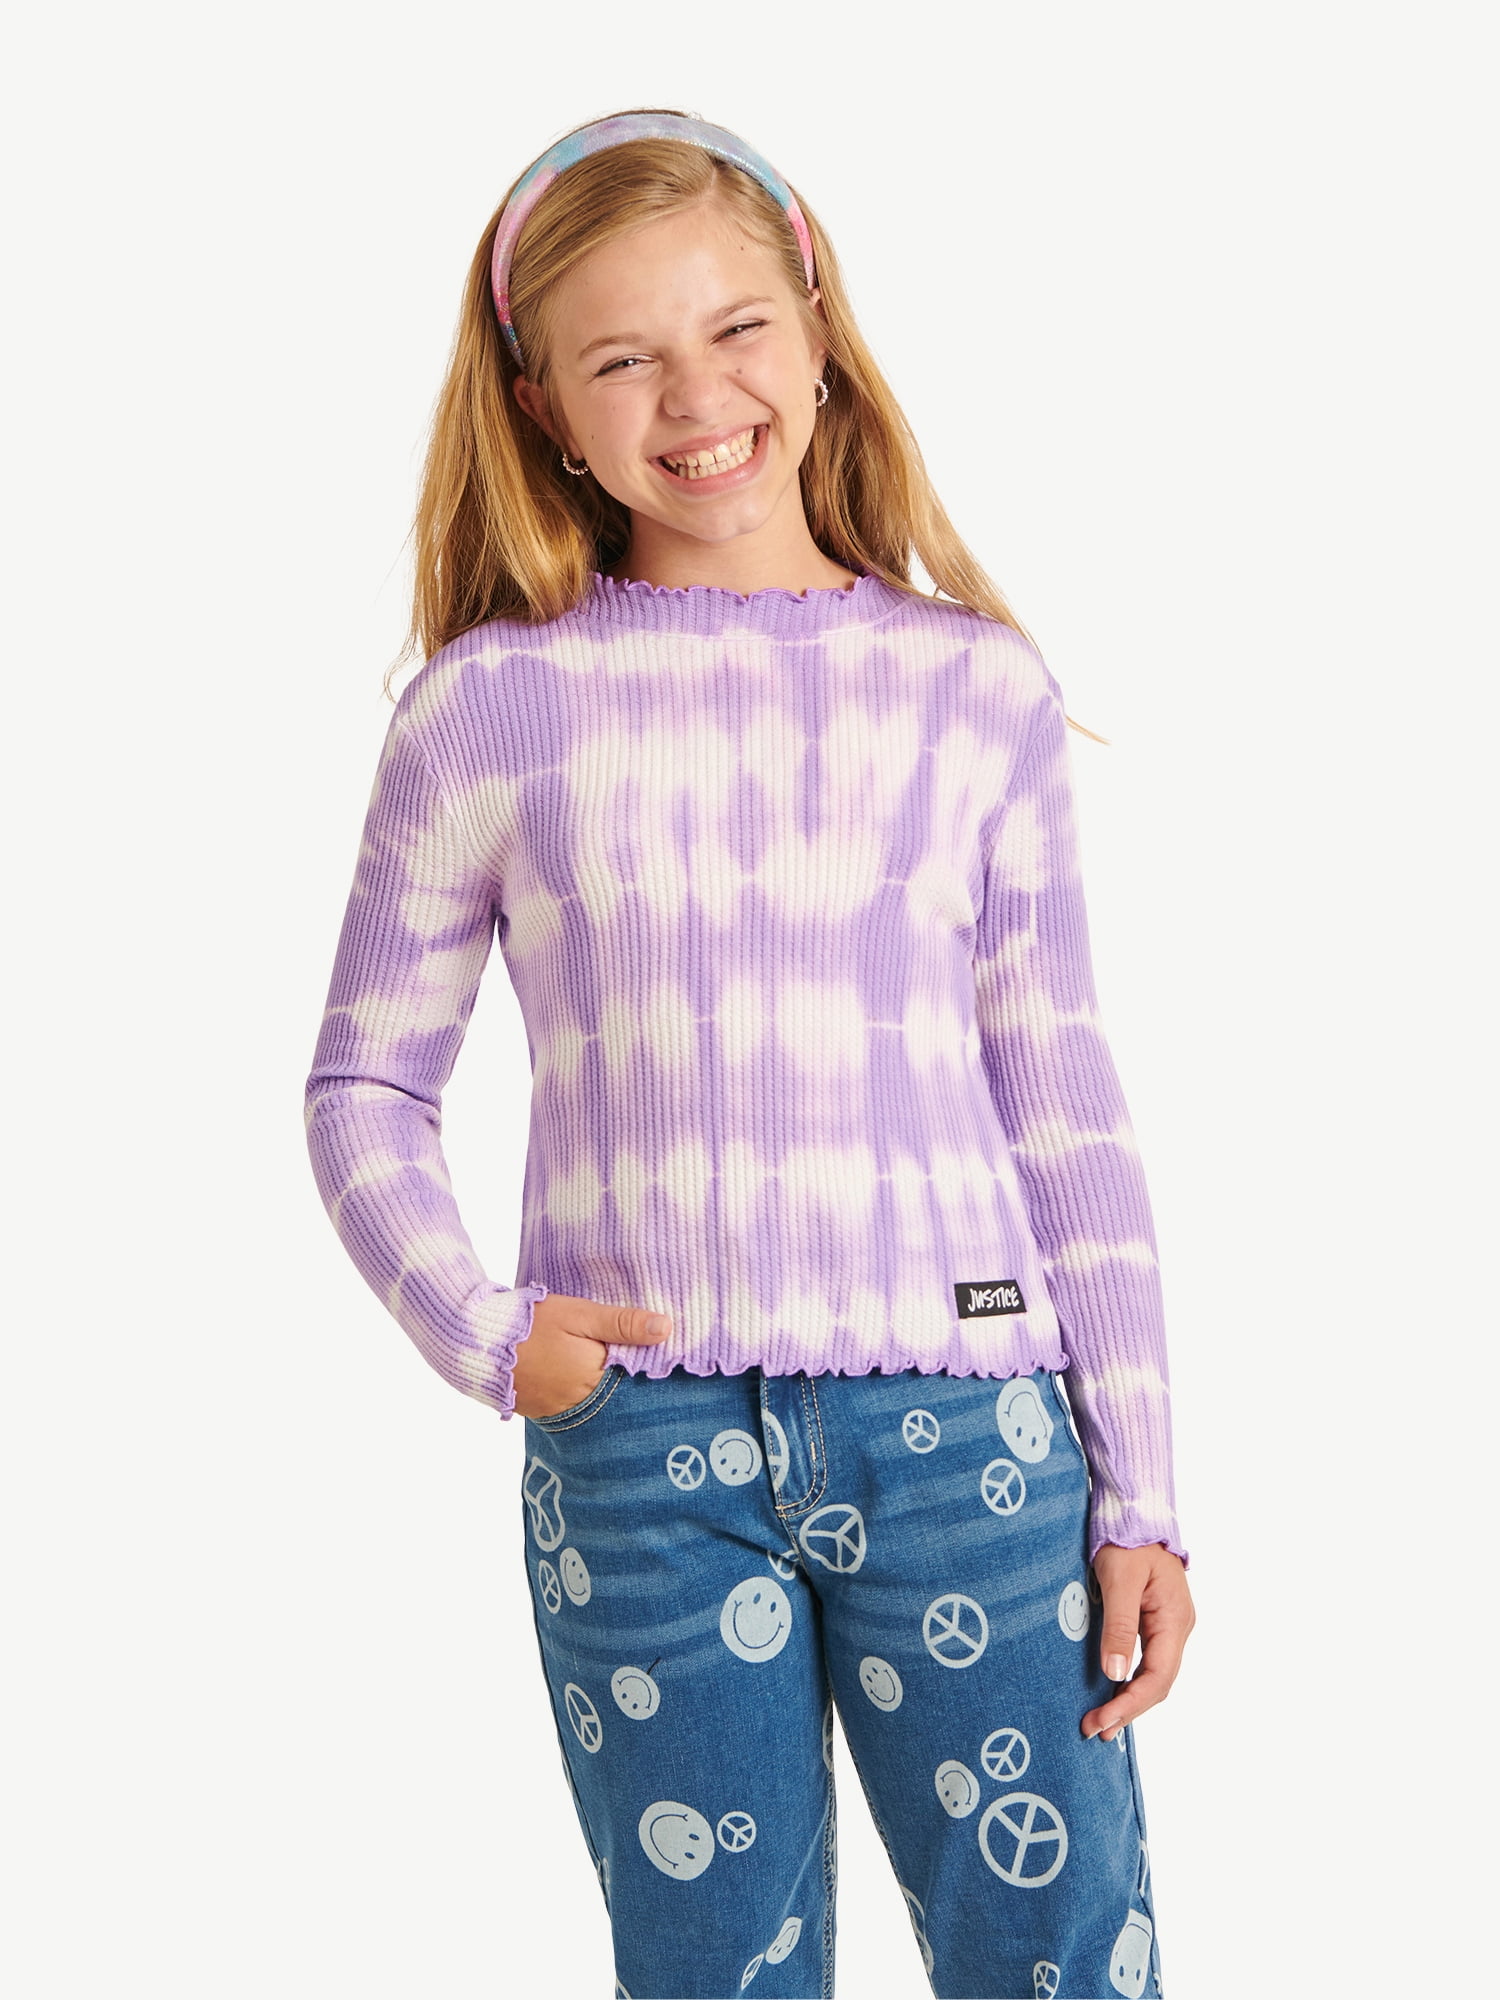 Justice Girls Mock Neck Waffle Top, Sizes 5-18 & Plus